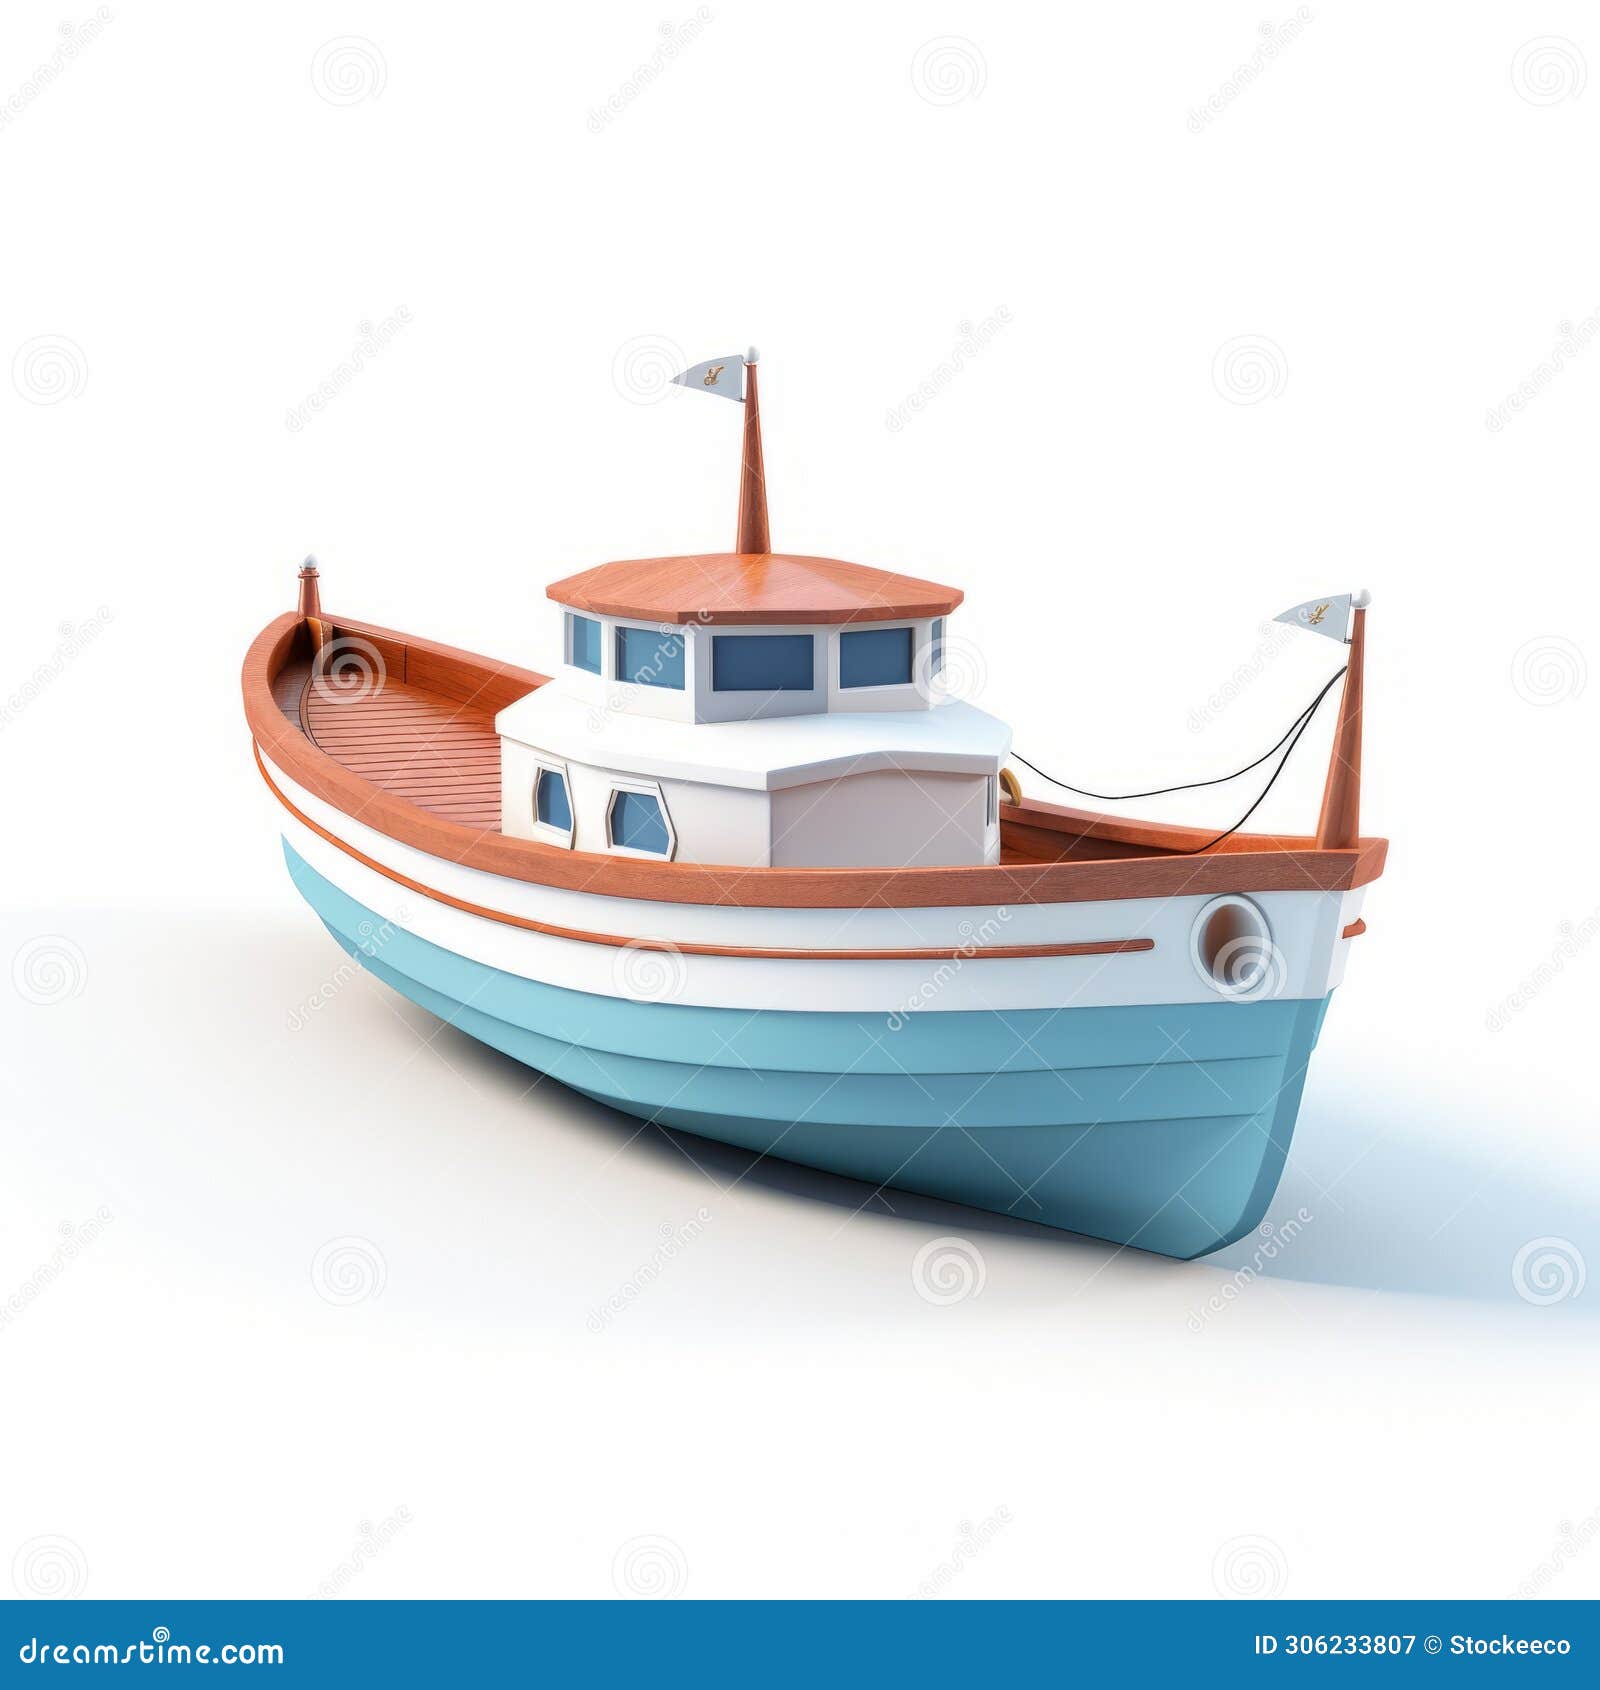 https://thumbs.dreamstime.com/z/cartoon-boat-d-model-royalty-free-vector-art-small-toy-boat-rendered-maya-sits-white-surface-realistic-usage-306233807.jpg